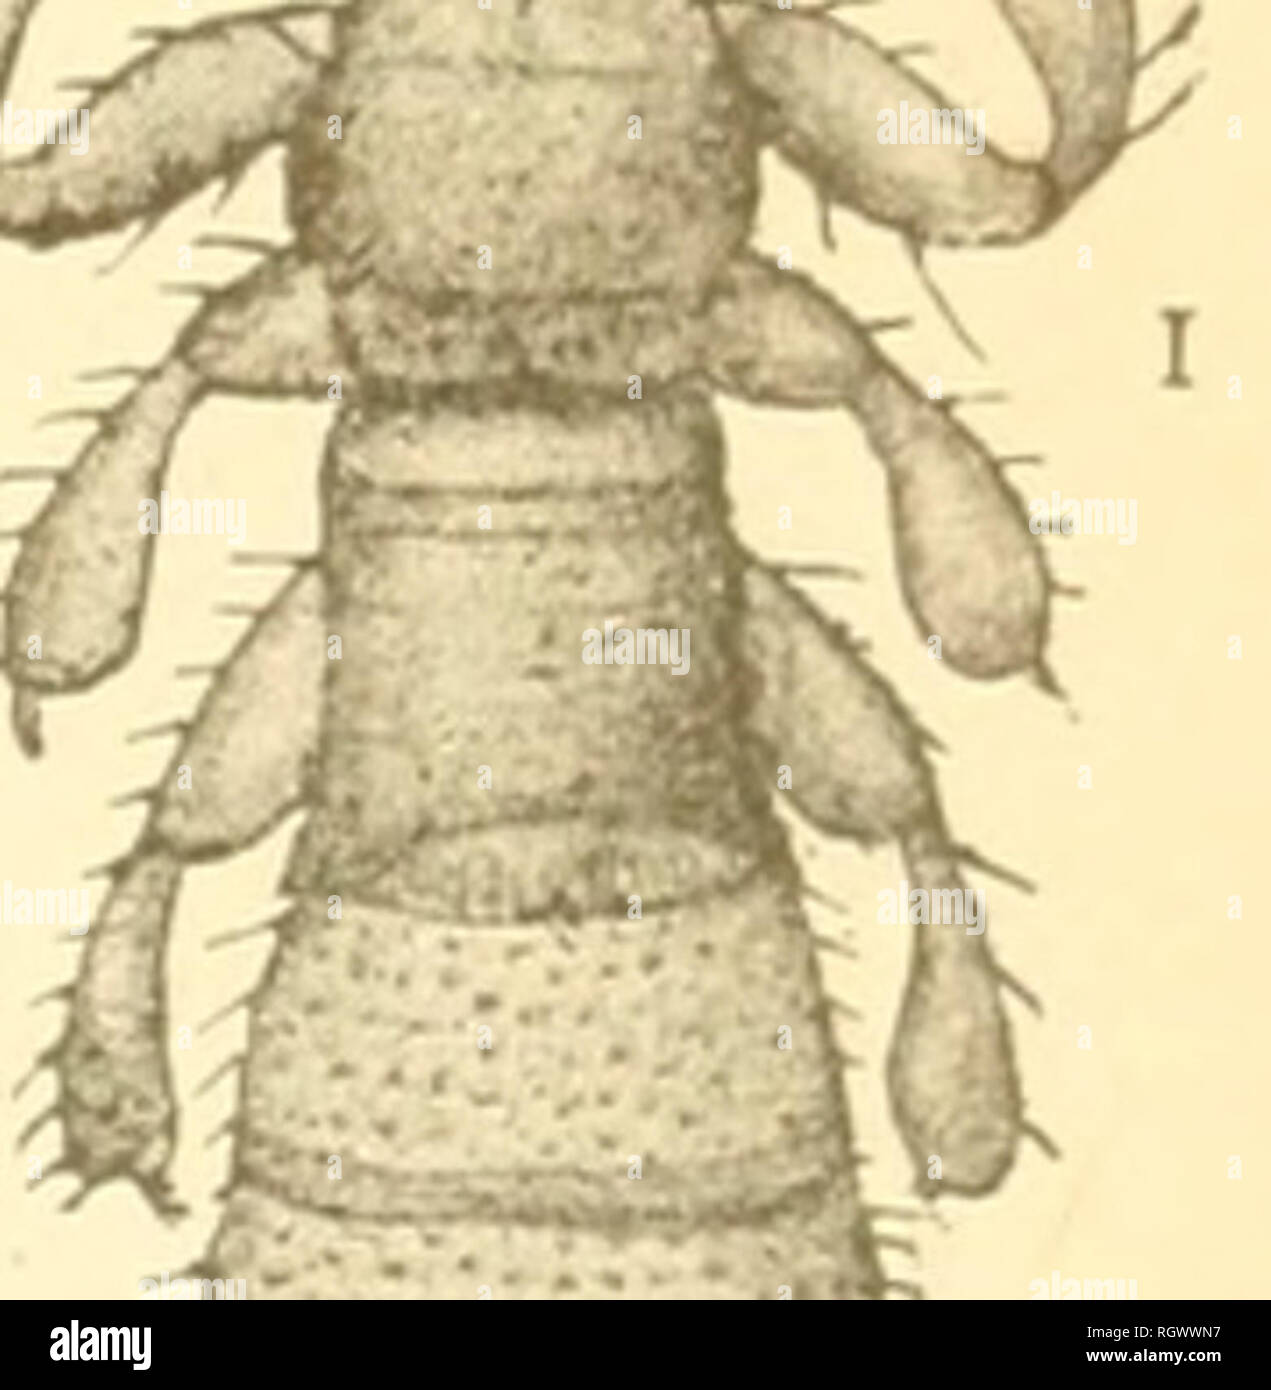 . Bulletin. Insects; Insect pests; Entomology; Insects; Insect pests; Entomology. 51 LOUSE OF DUCKS. {Trinoton luridum Nitzsch.) Redi seems to have been the first to give meution of this very com- mon species, it being figured in the Exper., PI. xii, as the lonse of the Teal. It is also figured by Albin (PI. 46) under the same common name as quoted by Denny. Kitzsch described it in 1818 under the name given above, and the species has been fortunate enough not to have received any other designation since, although it hasbeeu mentioned in most of the works referring to the parasites of domestic  Stock Photo